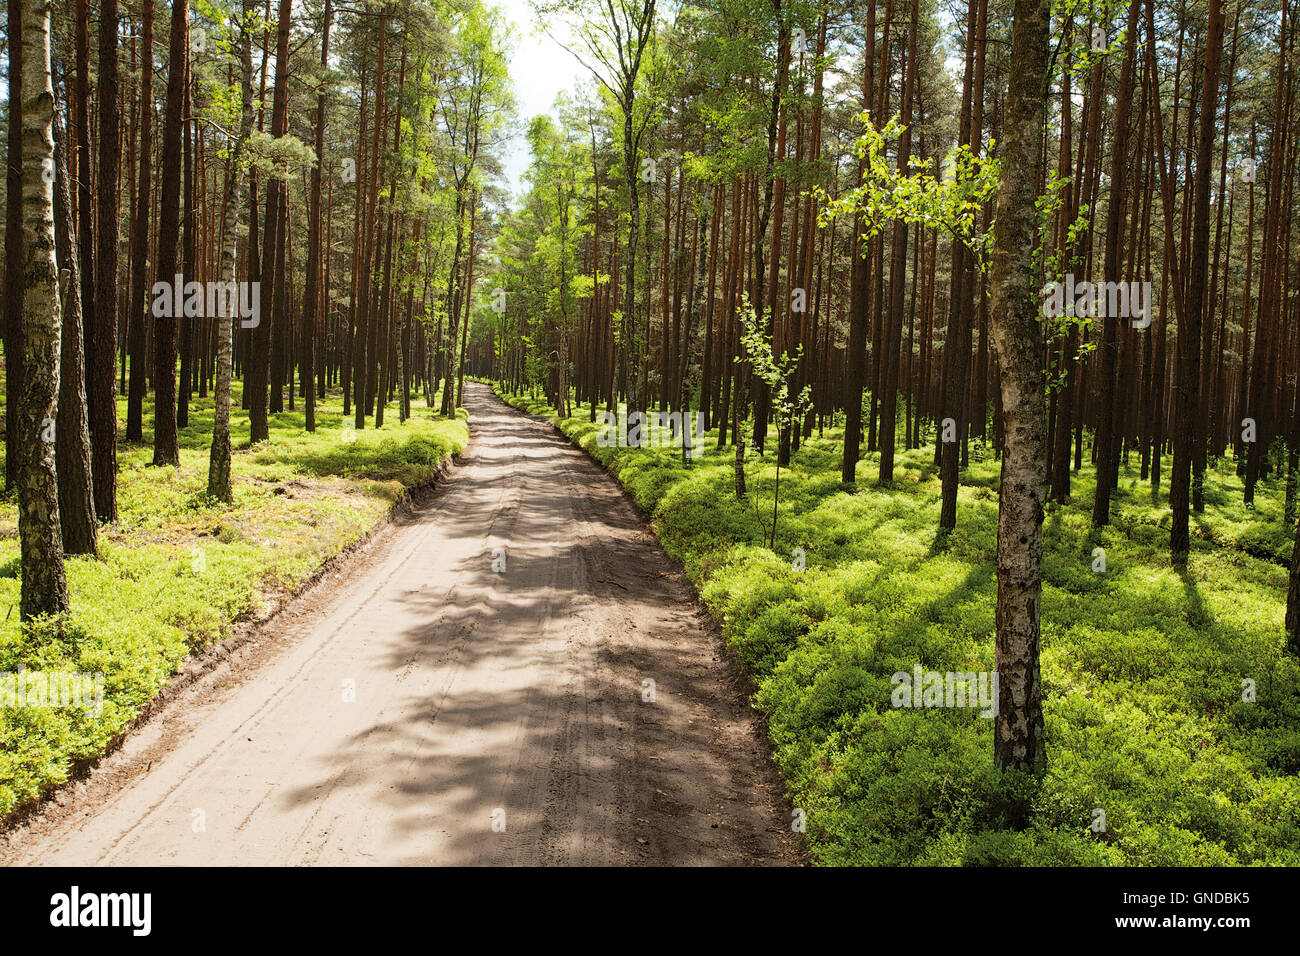 sandy rural road in pine forest with blueberries bushes Stock Photo